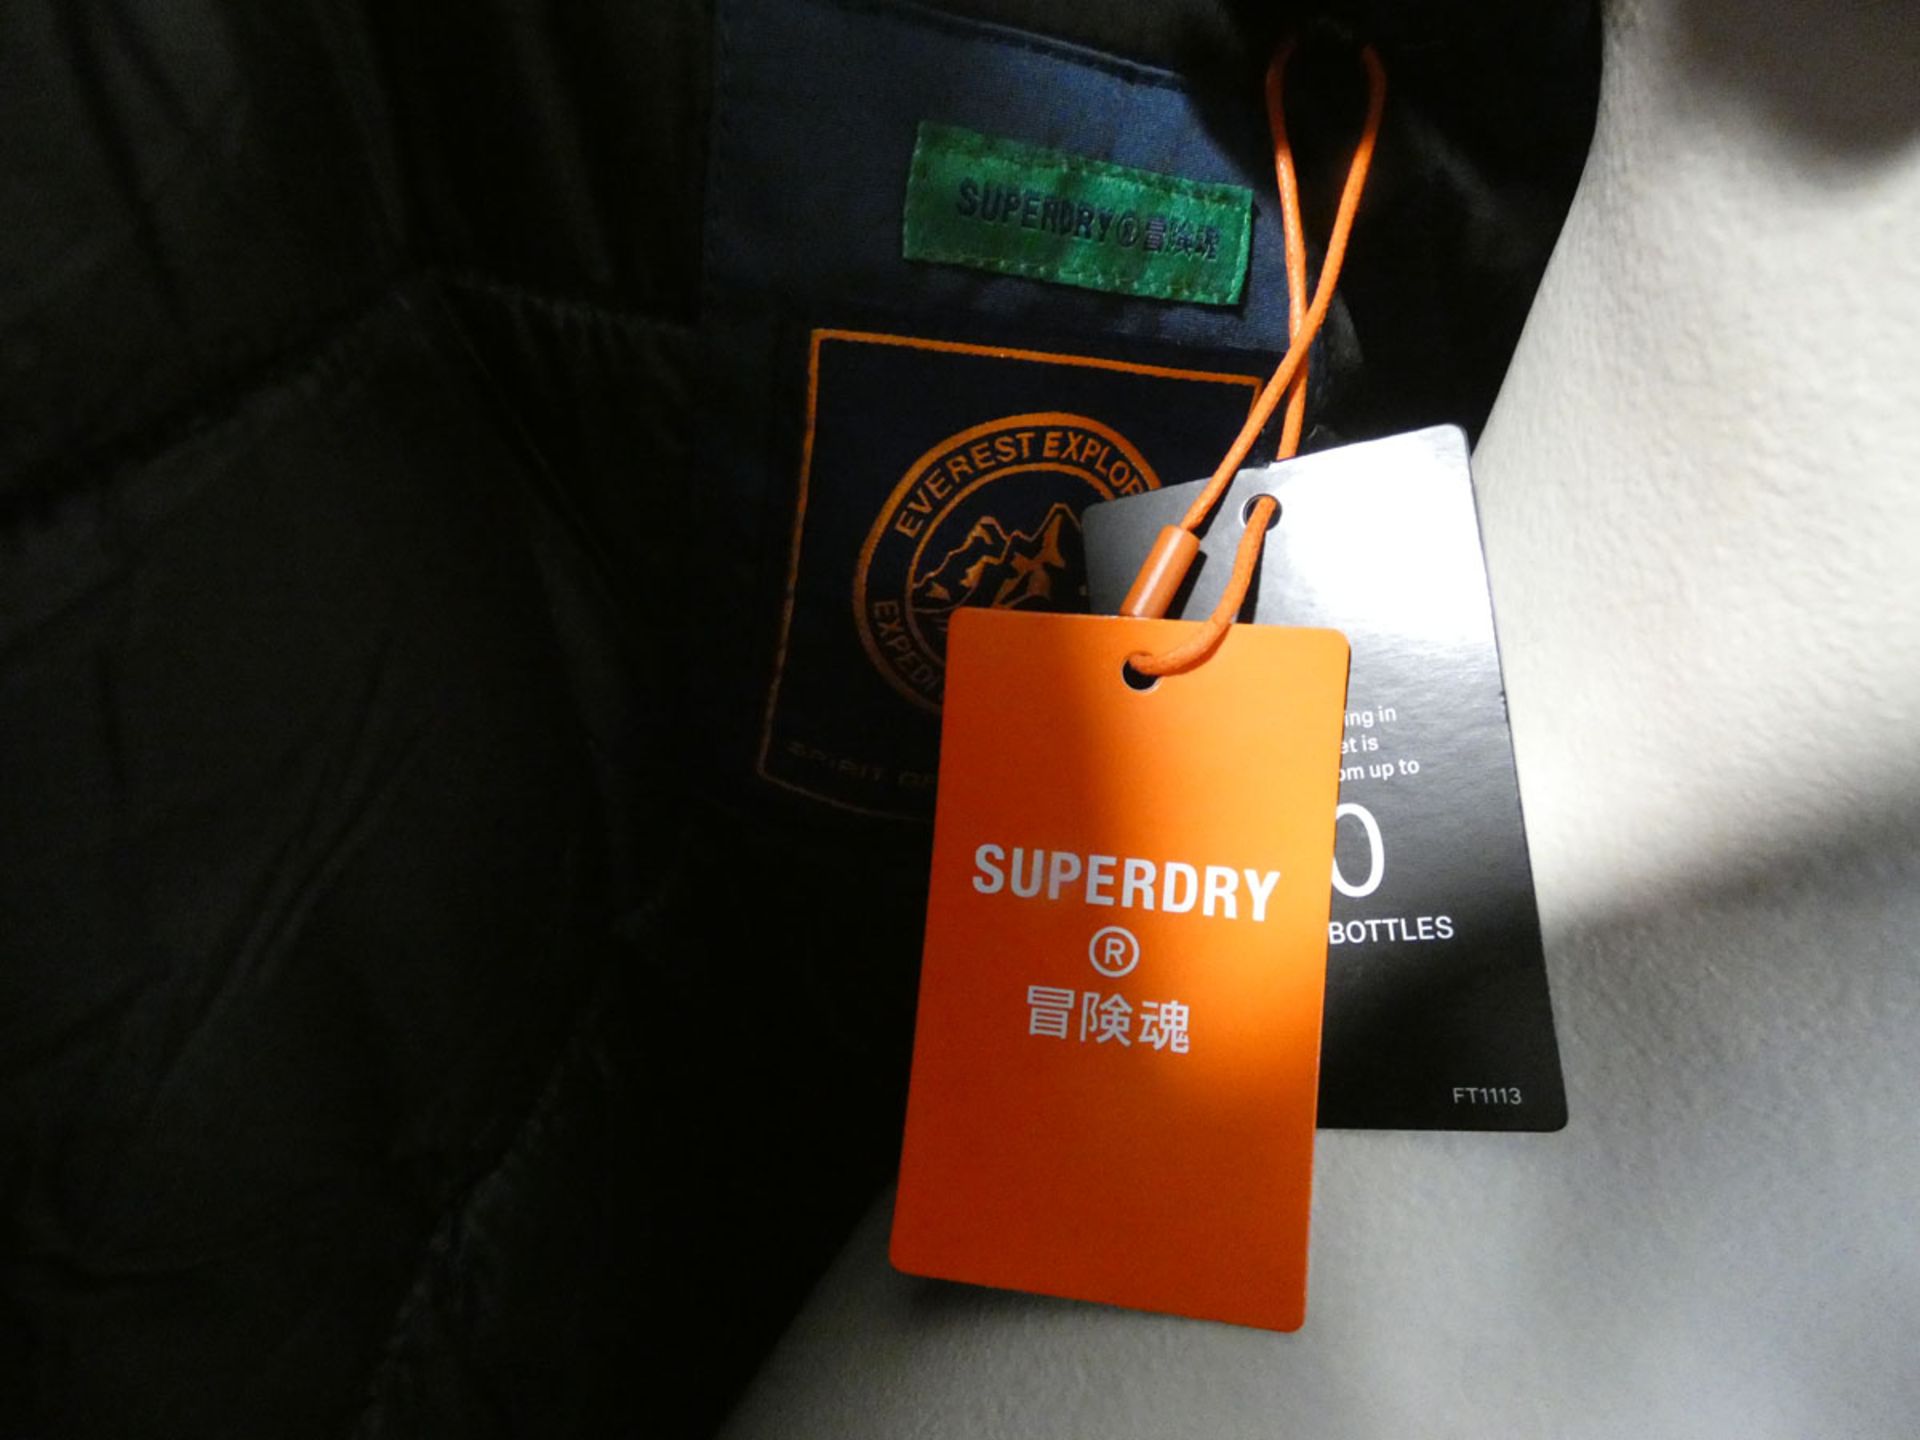 Superdry ladies everest parka in ocean blue size 16 (Mannequin not included) - Image 3 of 3